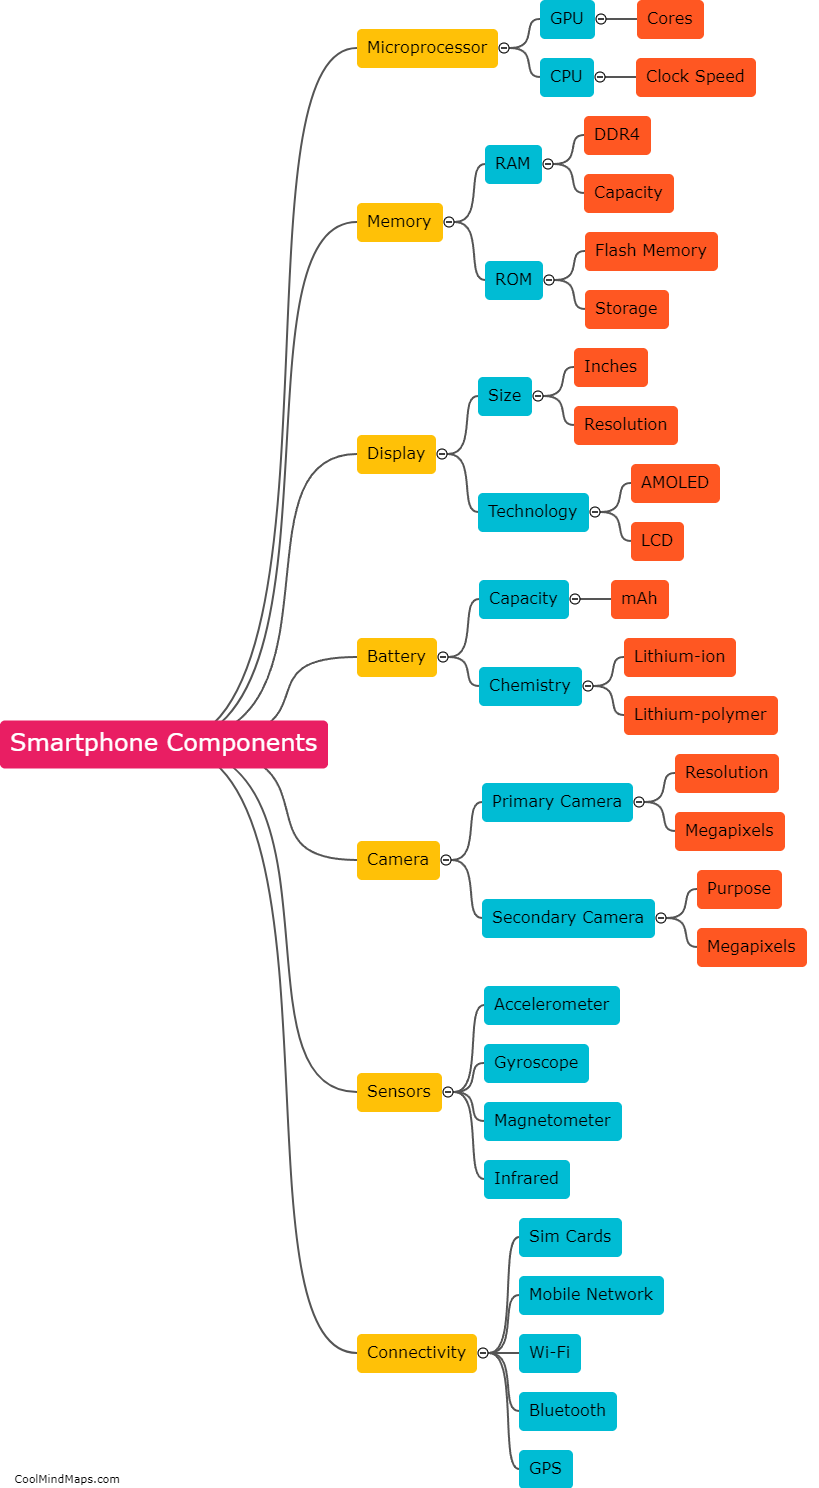 What components are needed to make a smartphone?